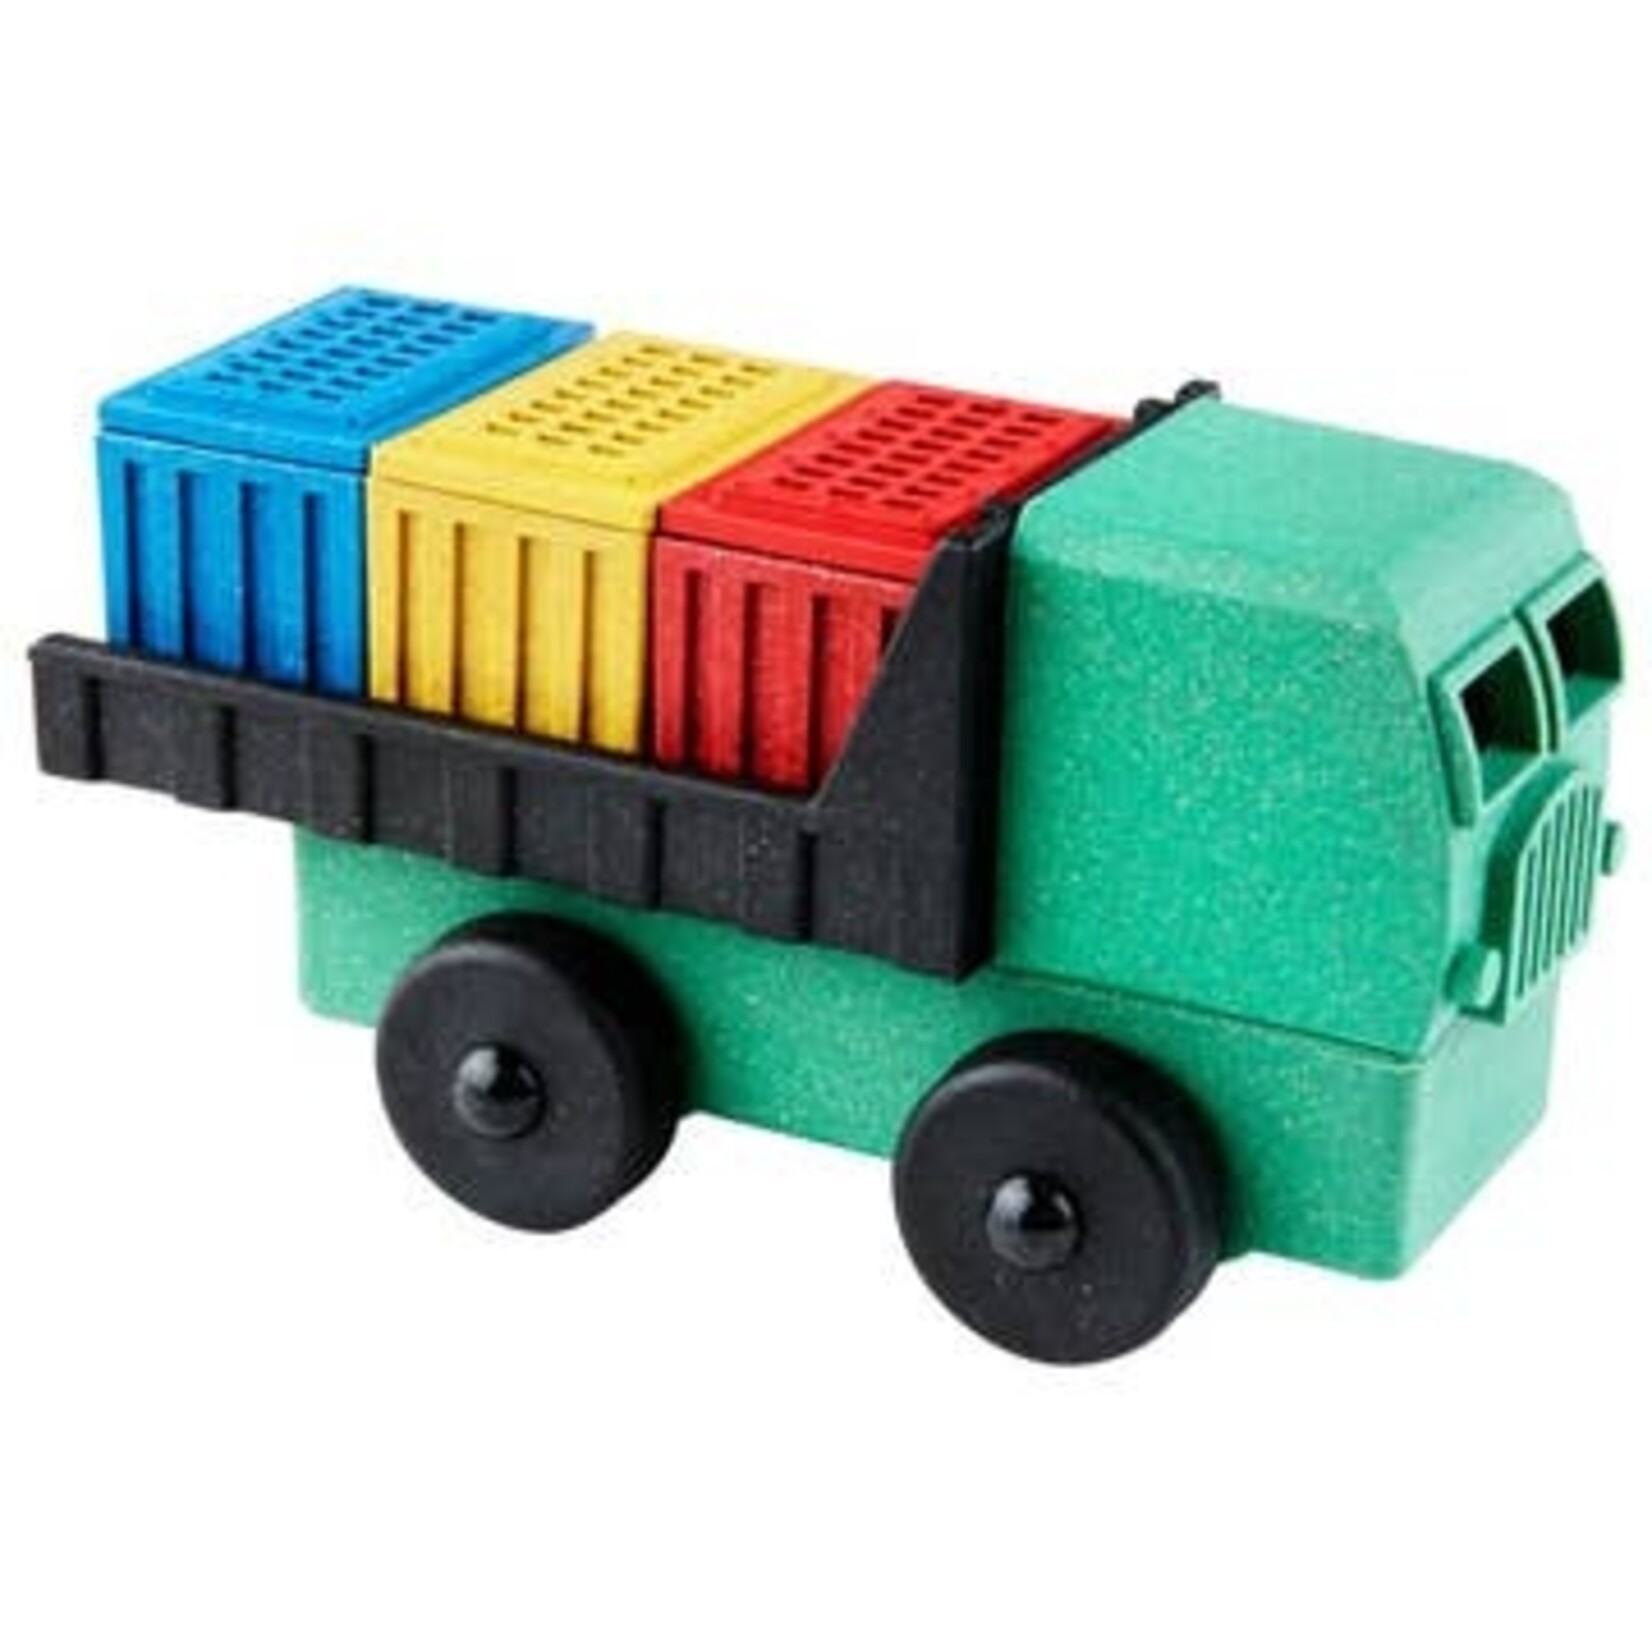 Luke's Toy Truck Collection